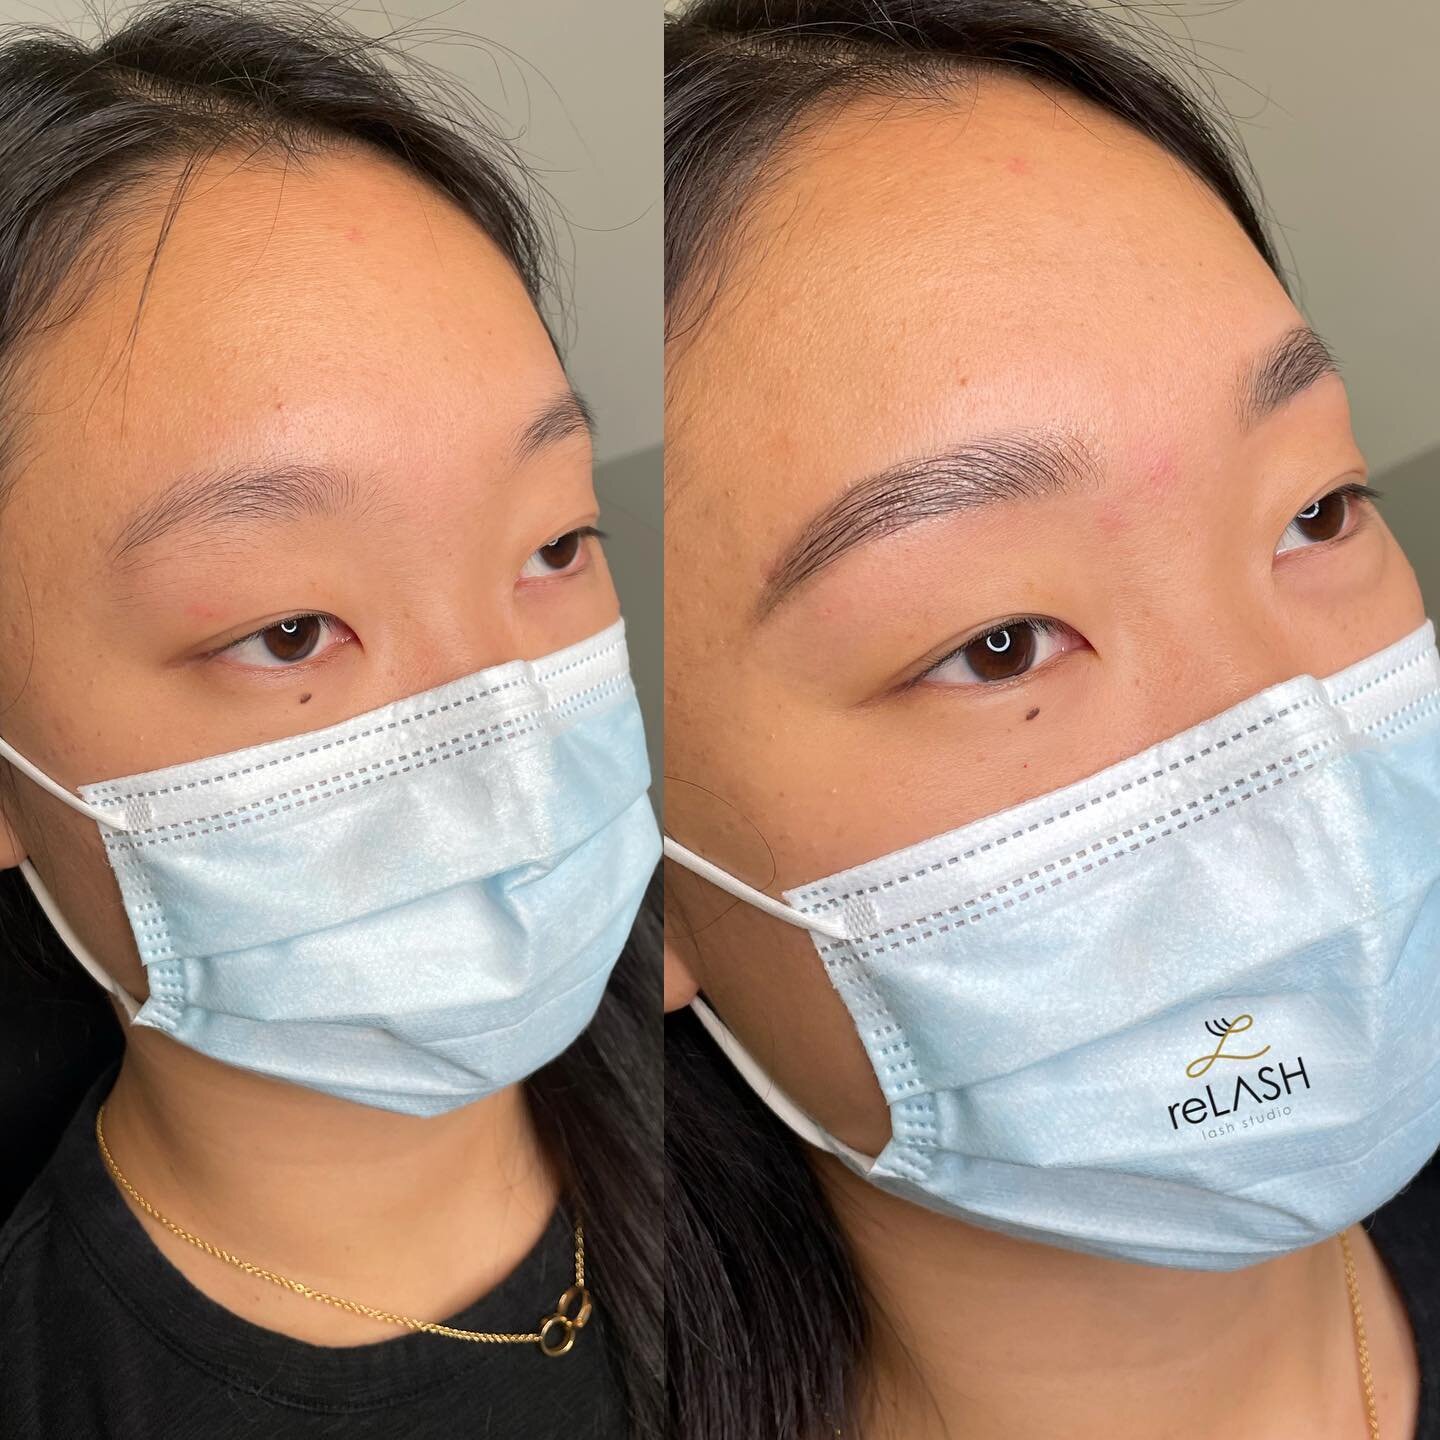 Brow Laminate, Shape, Tint Combo + Shine Repair Brow Treatment ✨

I love this soft and natural Brow Lami transformation!

Brow Laminations can be customized to the clients style. Whether you&rsquo;re bold and beautiful or soft and natural.

The brow 